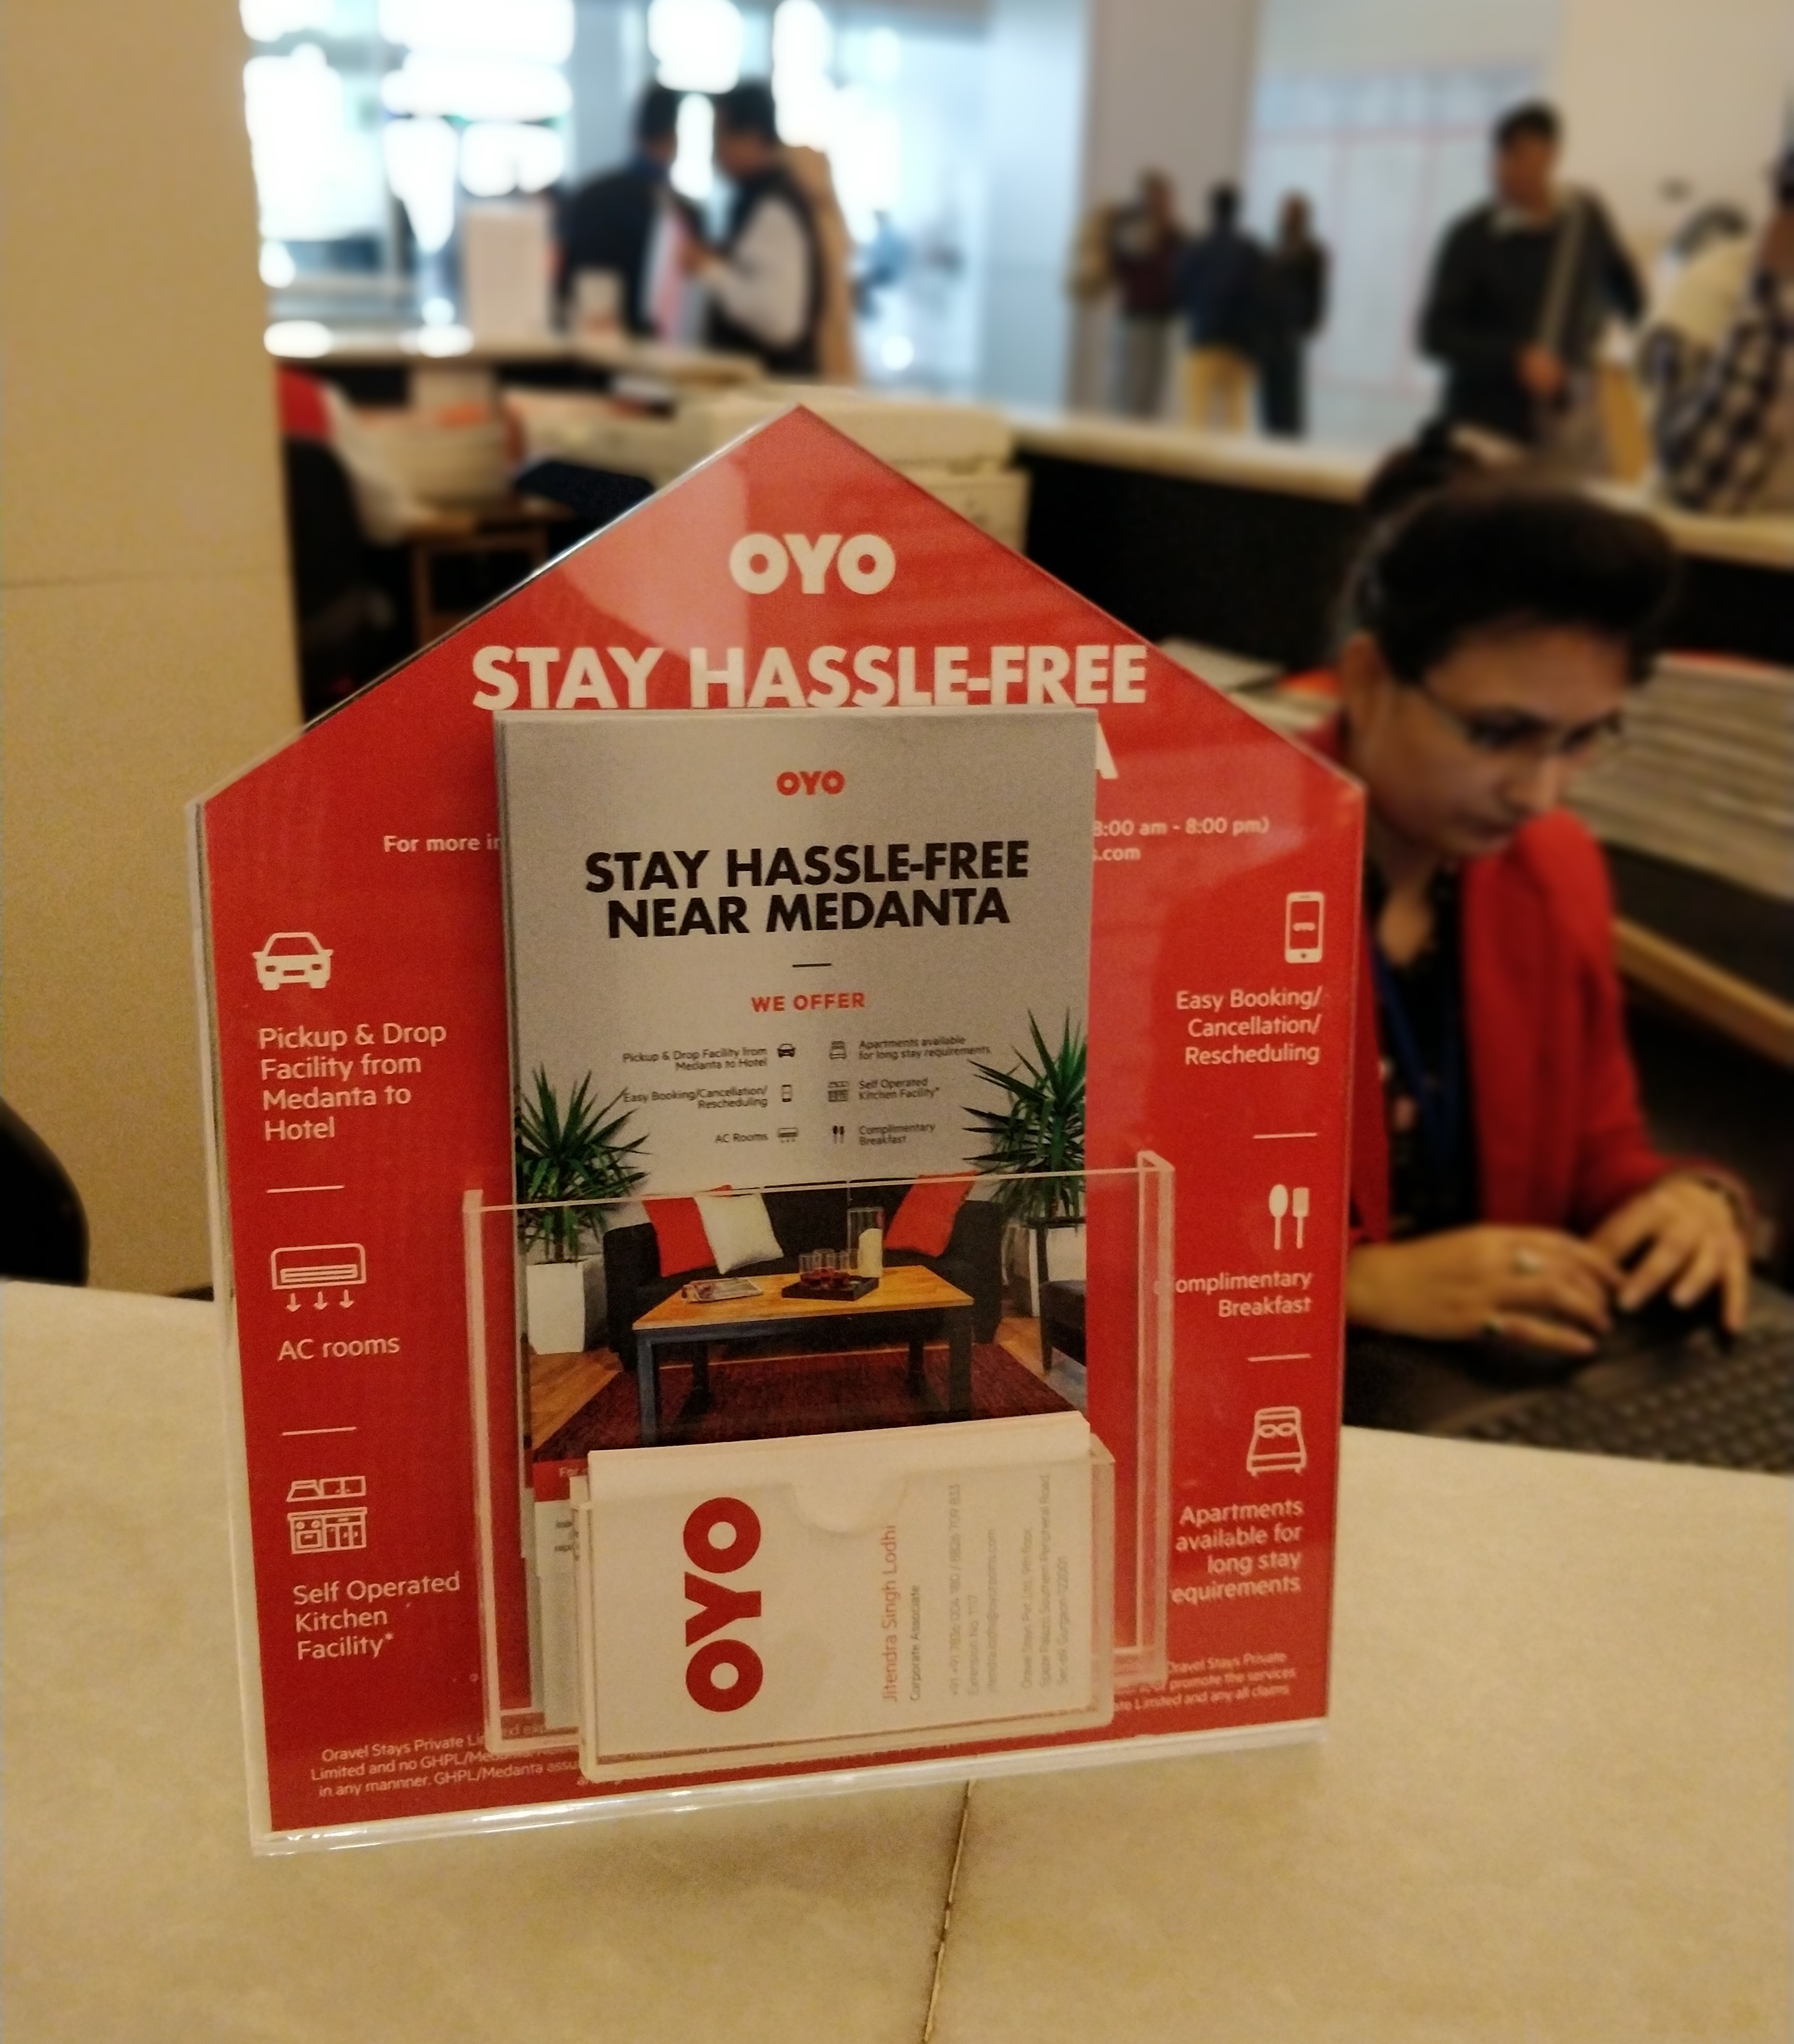 OYO desk at hospitals for helping people book rooms easily. People who are travelling for medical treatment can avail this option.